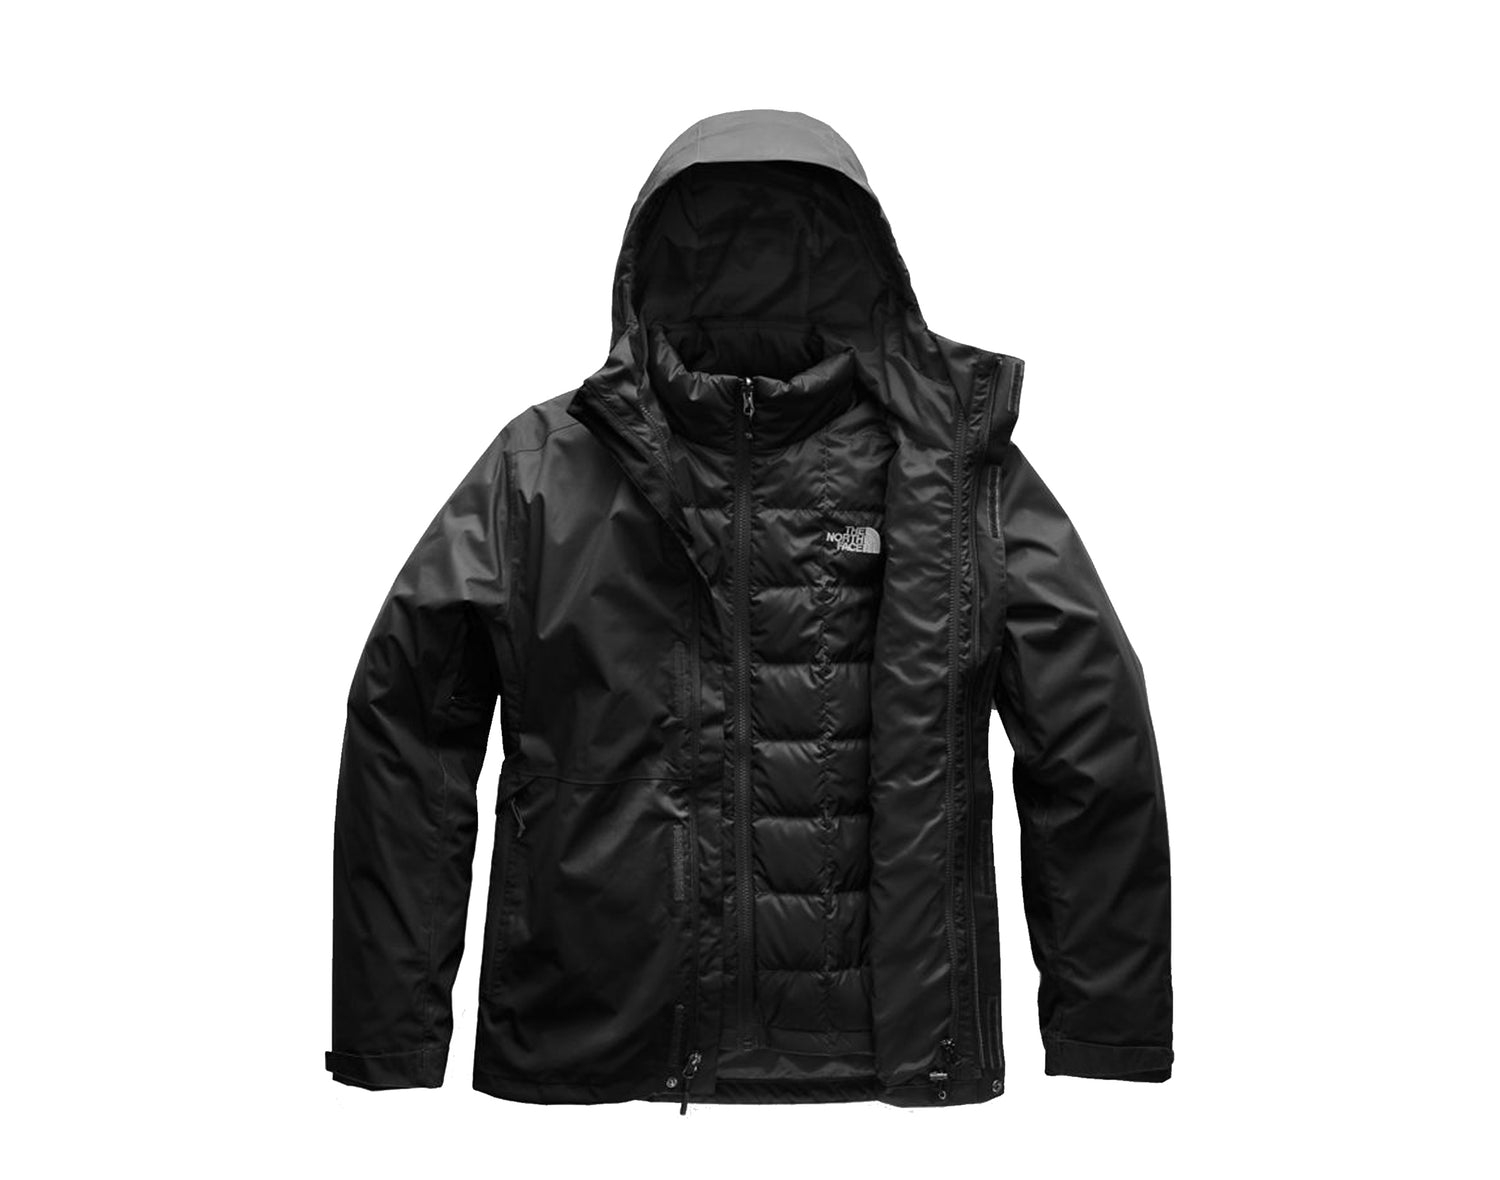 The North Face Altier Triclimate Men's Jacket